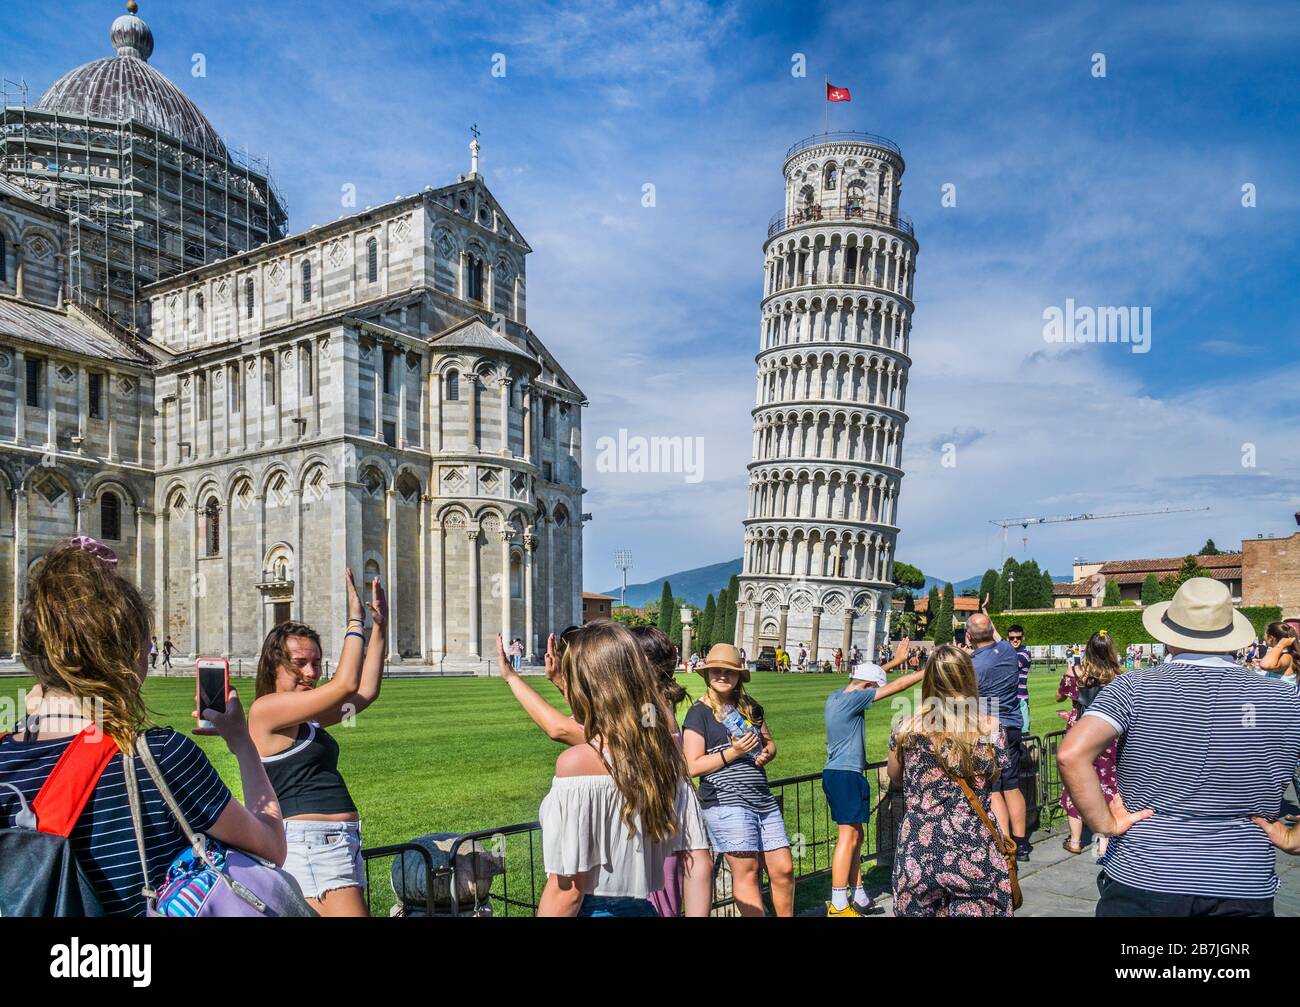 the campanile, the freestanding bell tower of Pisa Cathedral in the Piazza dei Miracoli, the iconic Leaning Tower of Pisa, Tuscany, Italy Stock Photo